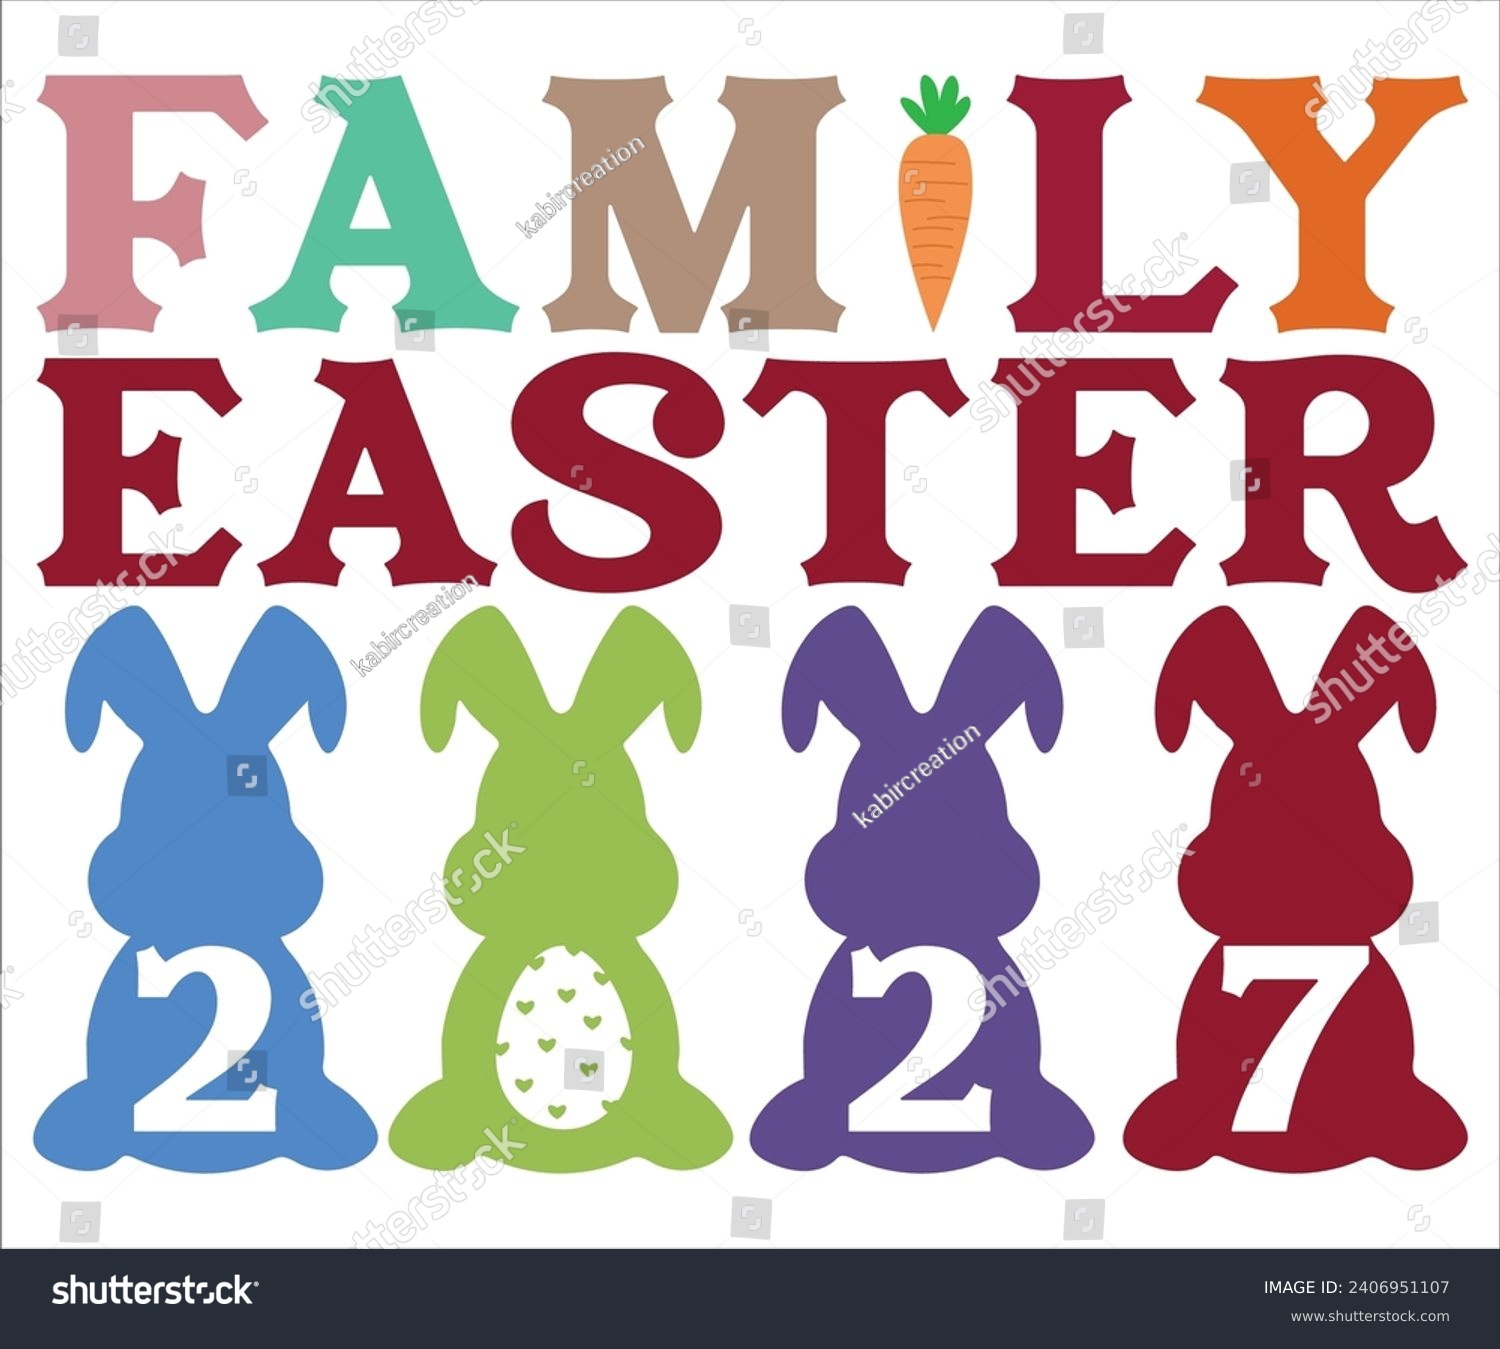 SVG of family 2027 T-shirt, Happy easter T-shirt, Easter shirt, spring holiday, Easter Cut File,  Bunny and spring T-shirt, Egg for Kids, Easter Funny Quotes, Cut File Cricut svg